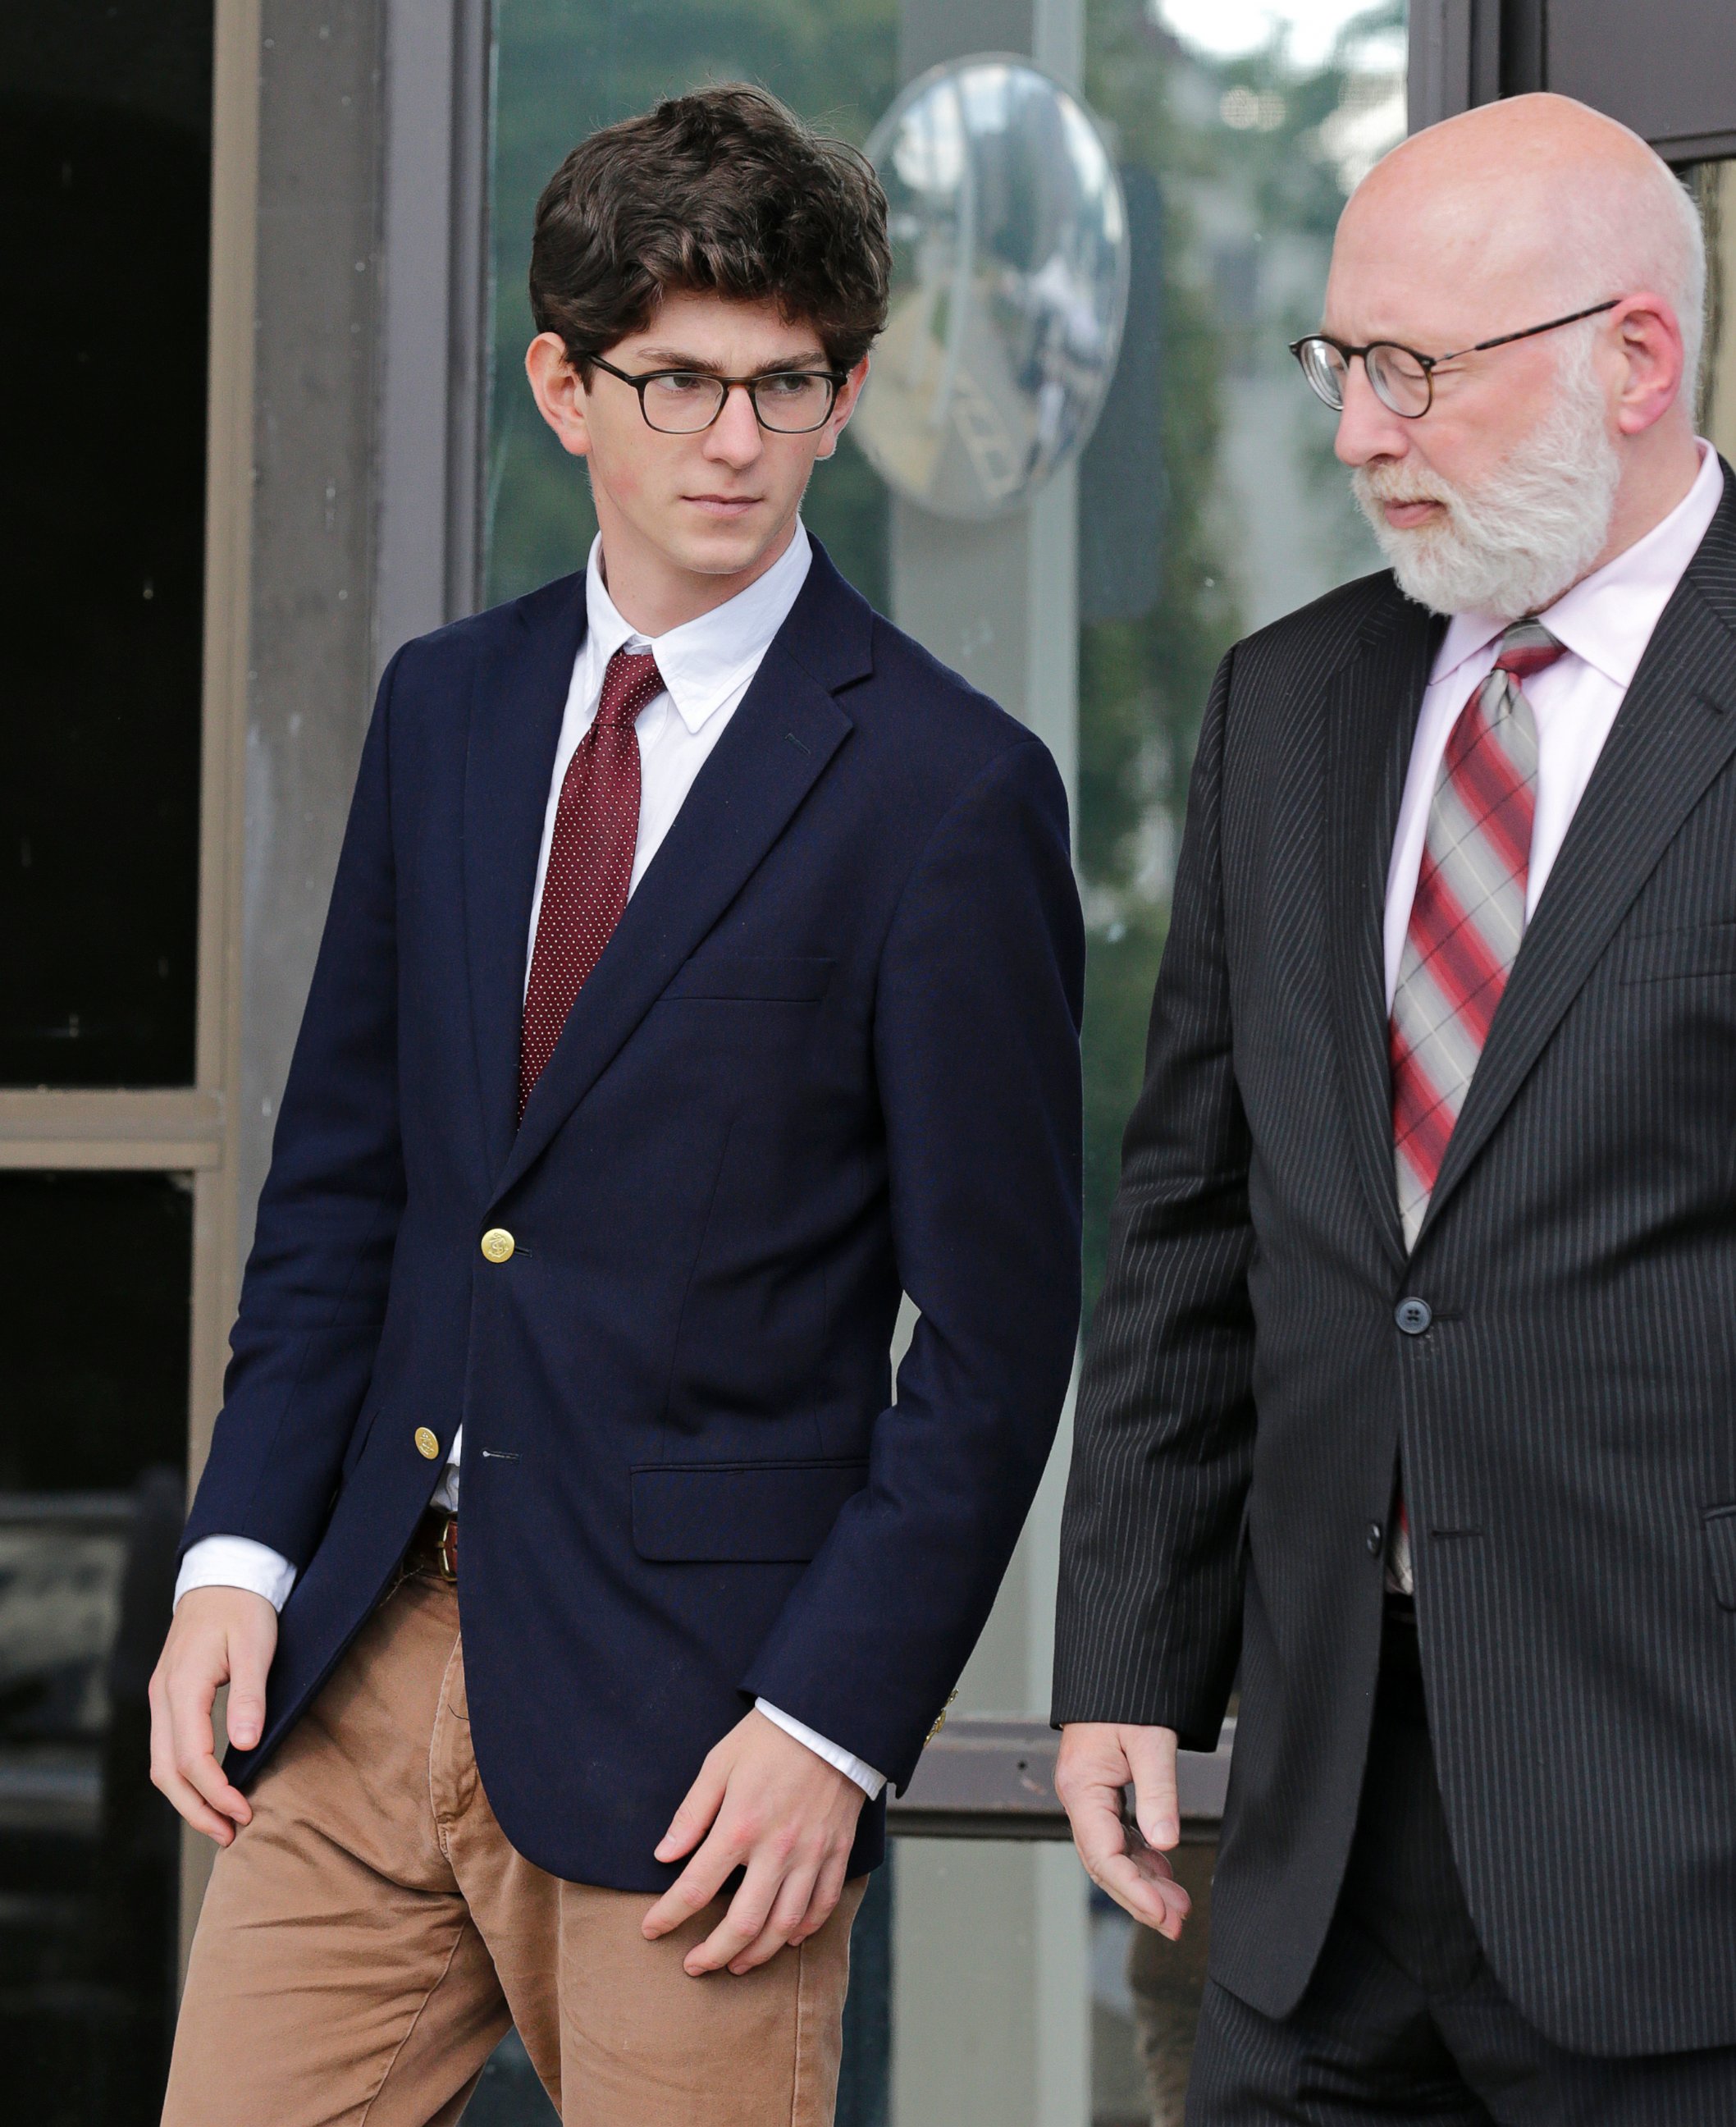 PHOTO: Former St. Paul's School student Owen Labrie leavers court with his attorney J.W. Carney at Merrimack Superior Court in Concord, N.H., Aug. 26, 2015.